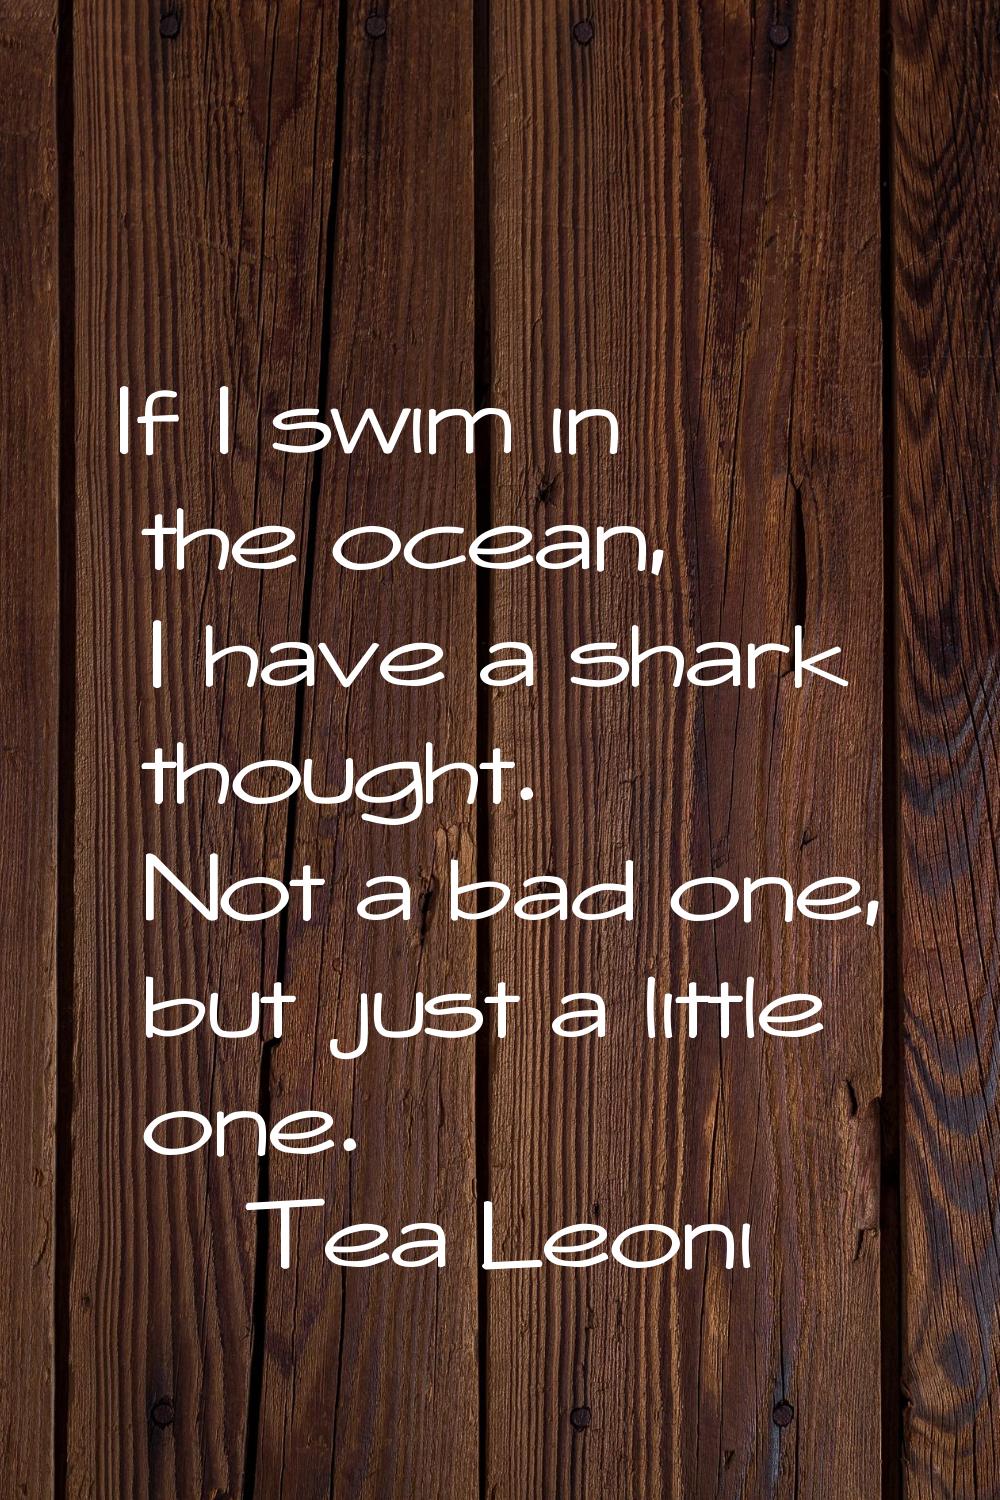 If I swim in the ocean, I have a shark thought. Not a bad one, but just a little one.